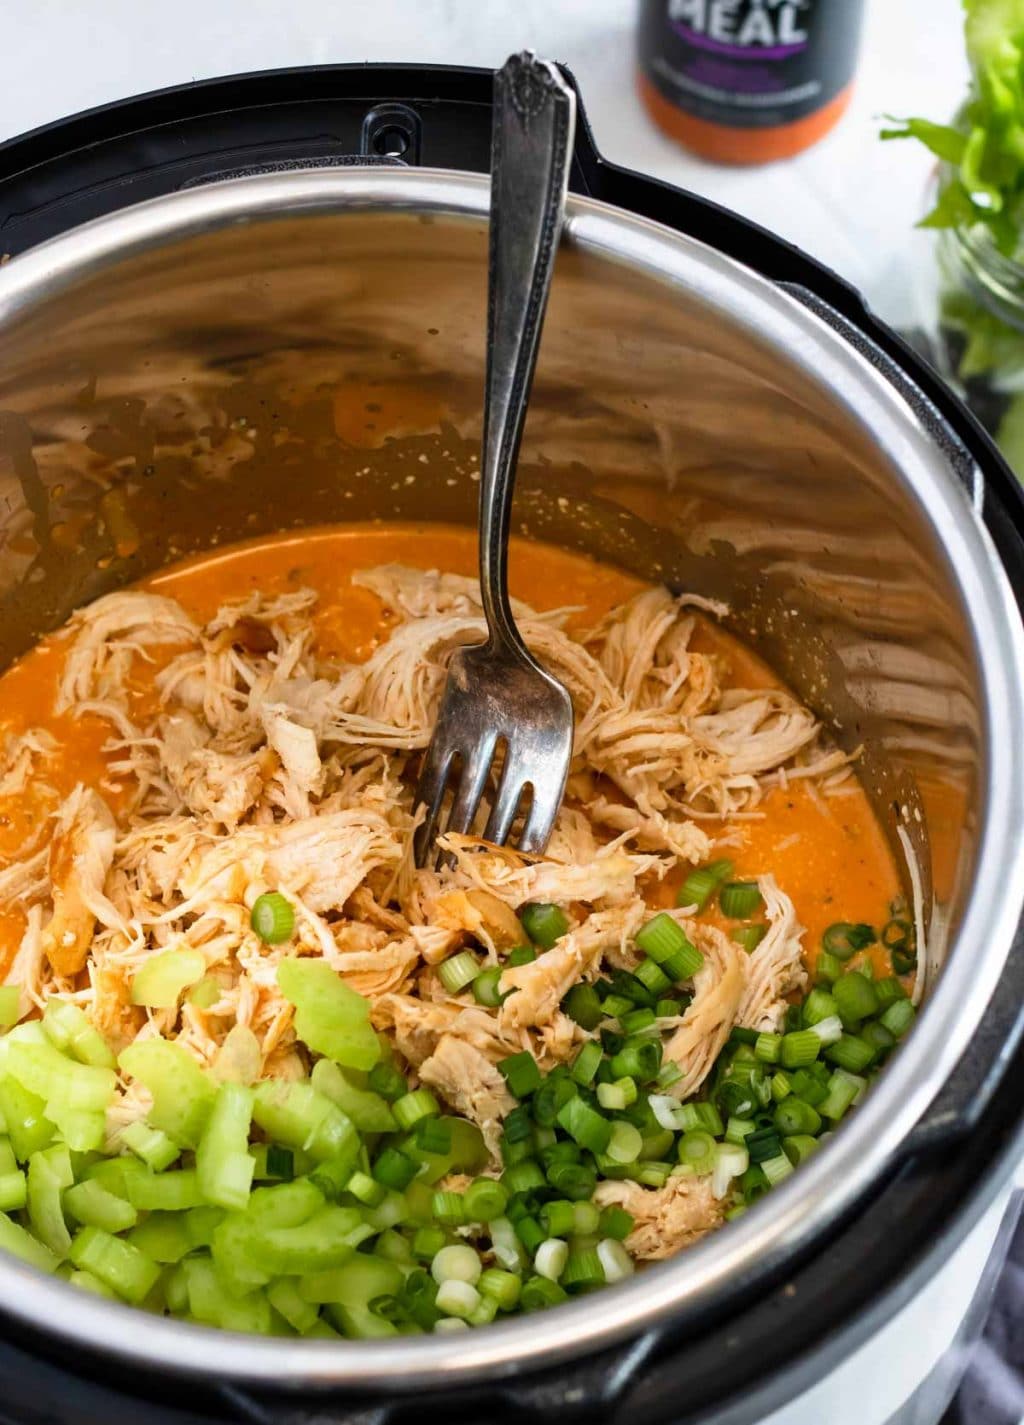 Chicken, celery, green onions, and buffalo sauce in the instant pot